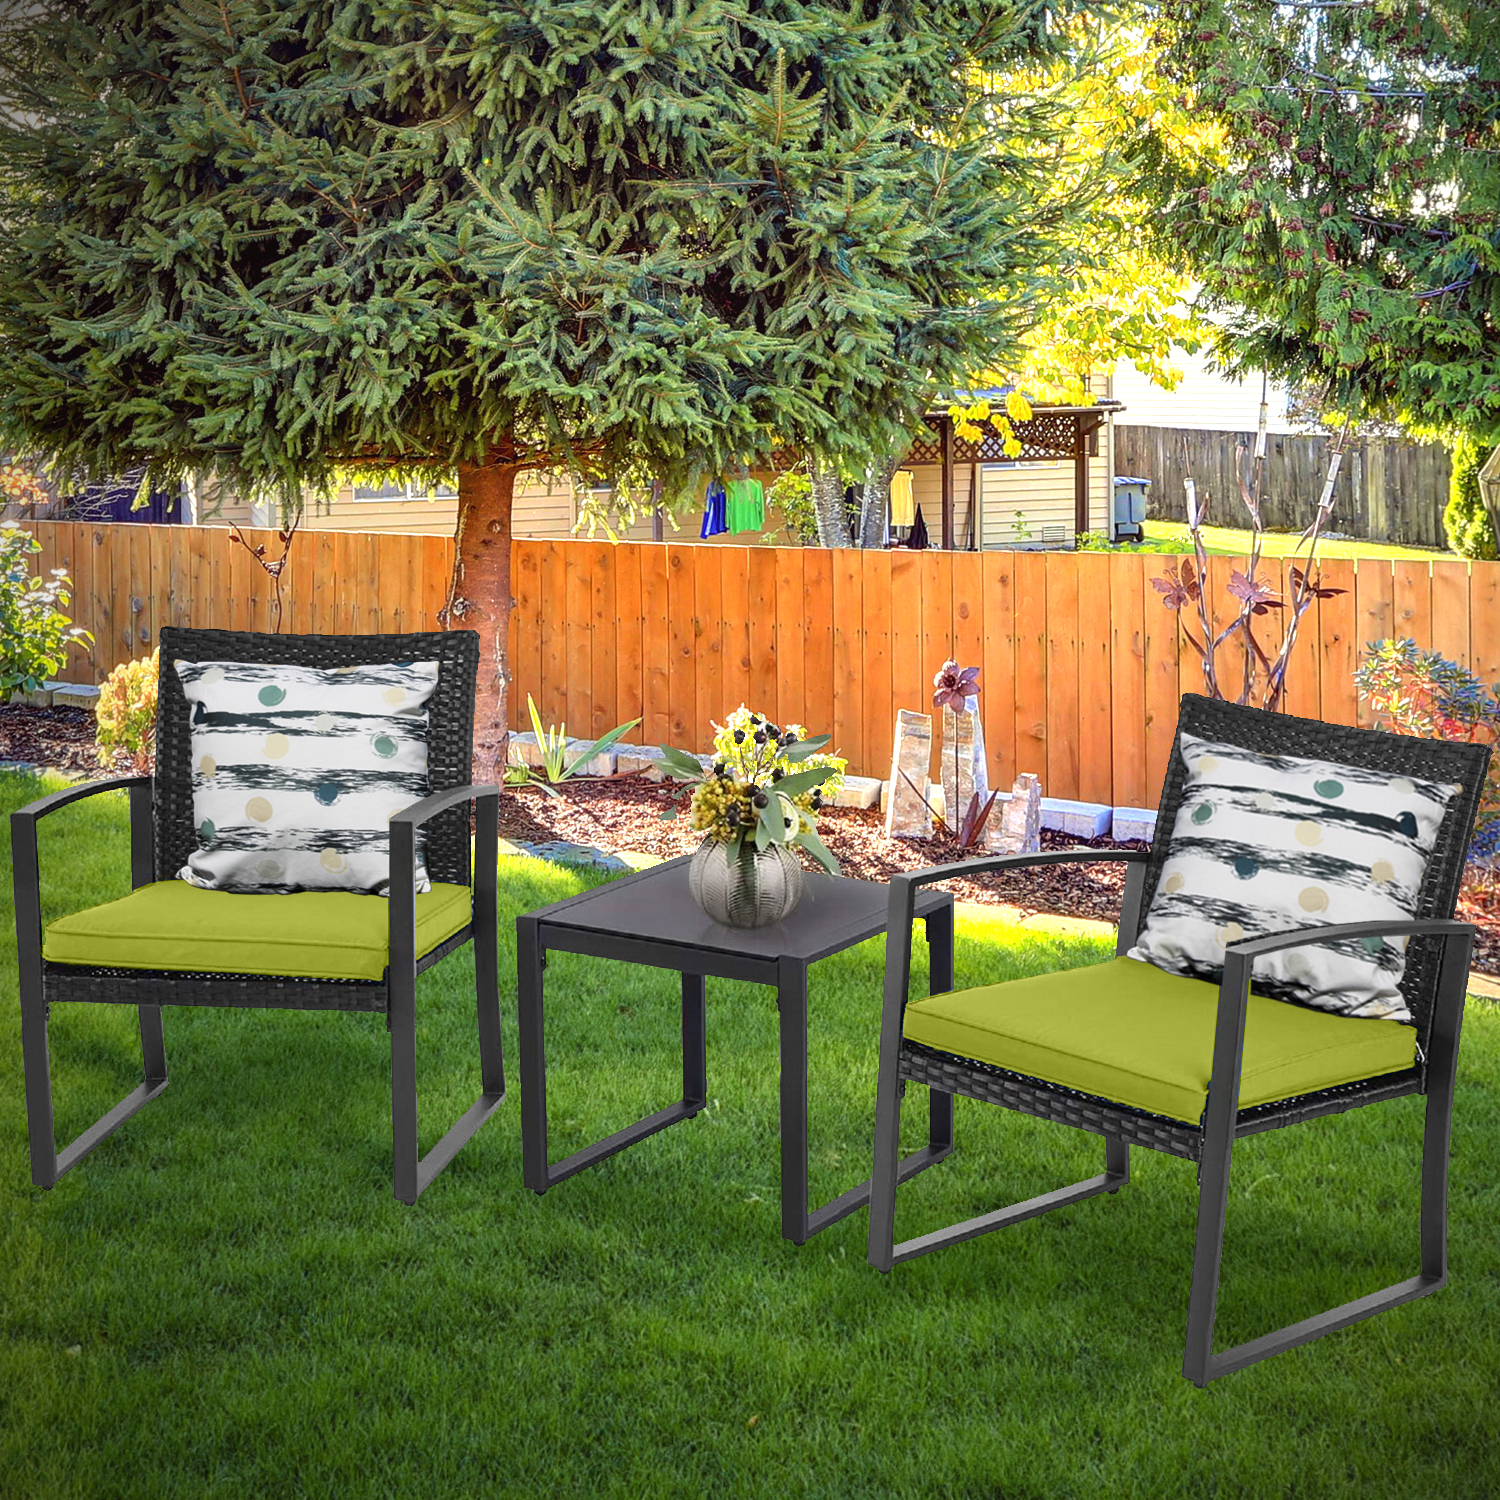 Outdoor 3-Piece Dialog Bistro Set Black Wicker Furniture-Two Chairs with Glass Coffee Table Green - image 1 of 7